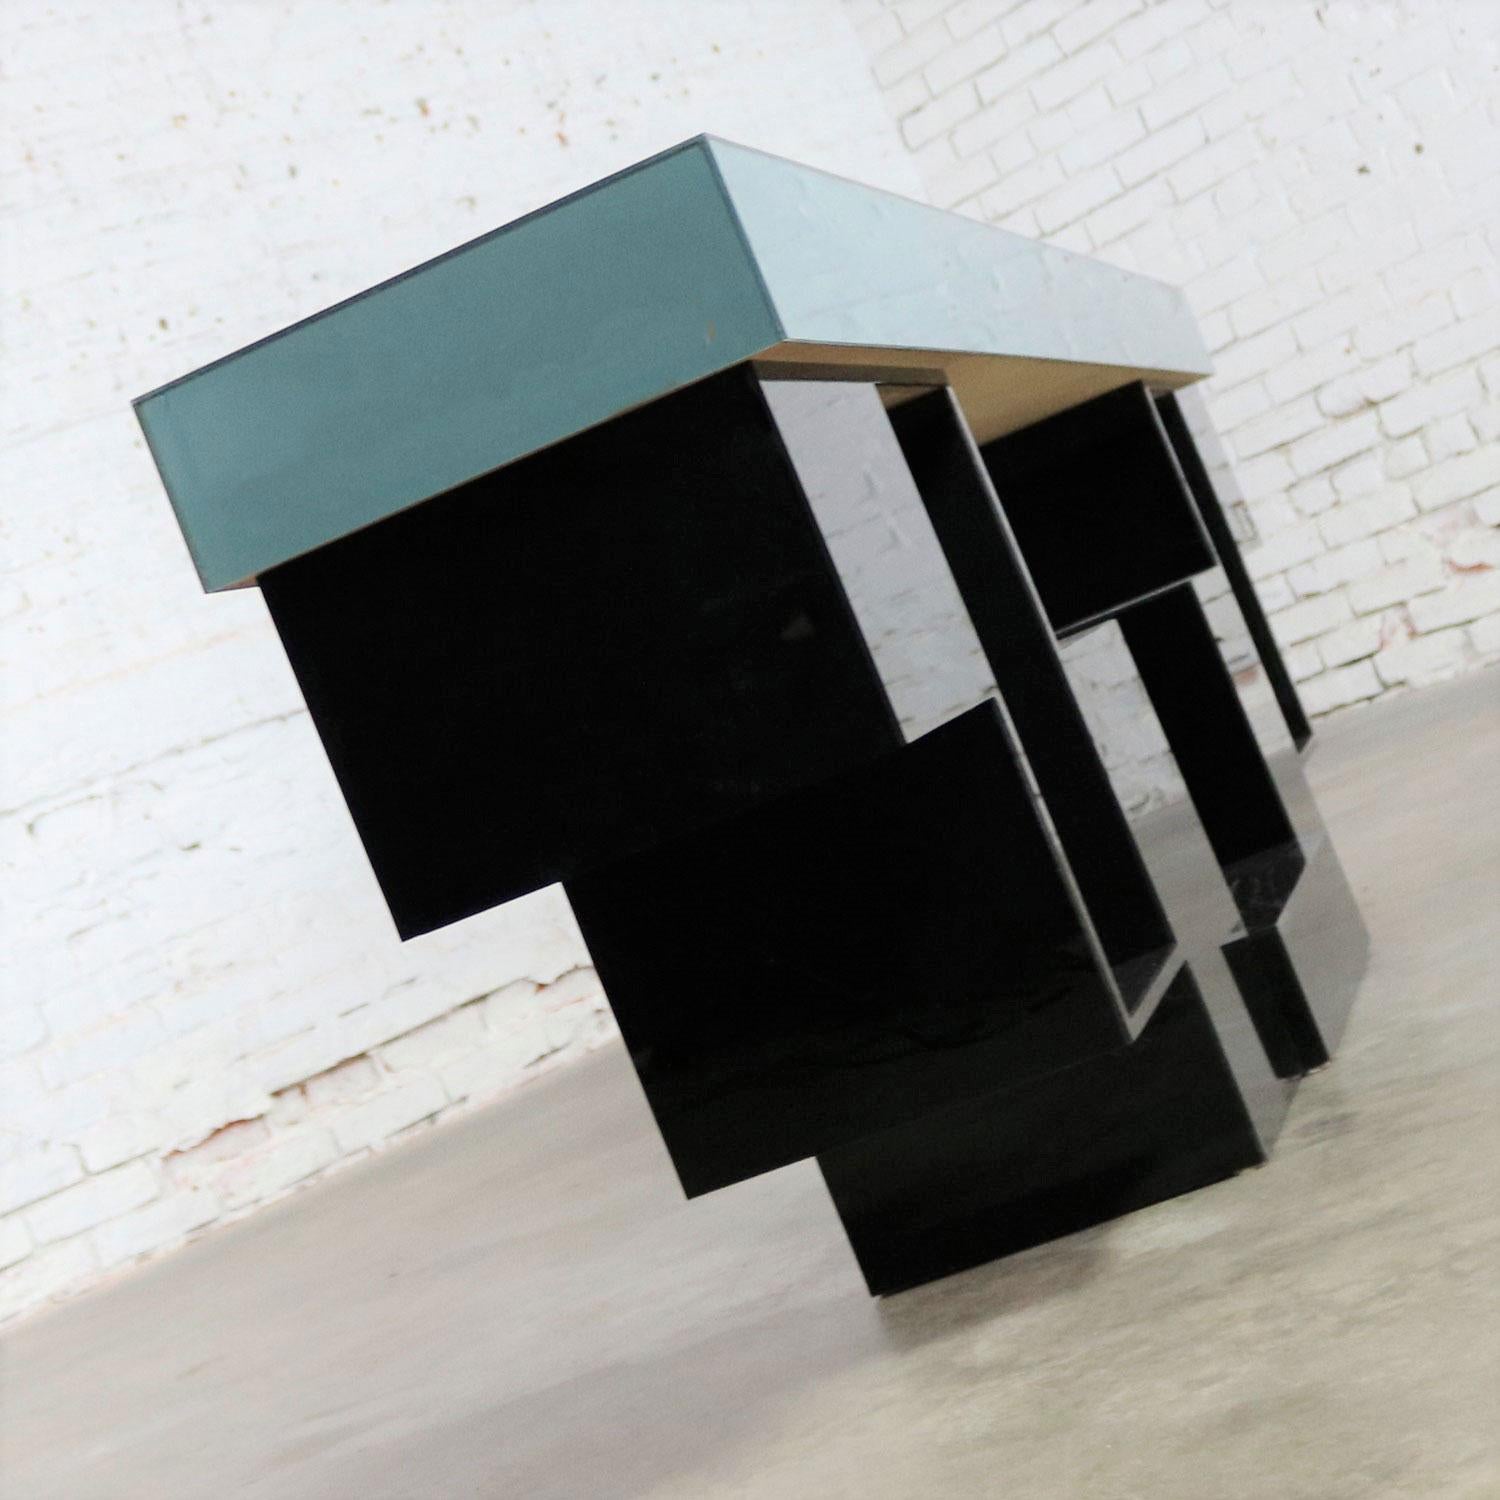 20th Century Modern Zig Zag Stepped Plexiglass Clad Console Table Credenza in Black and Teal For Sale